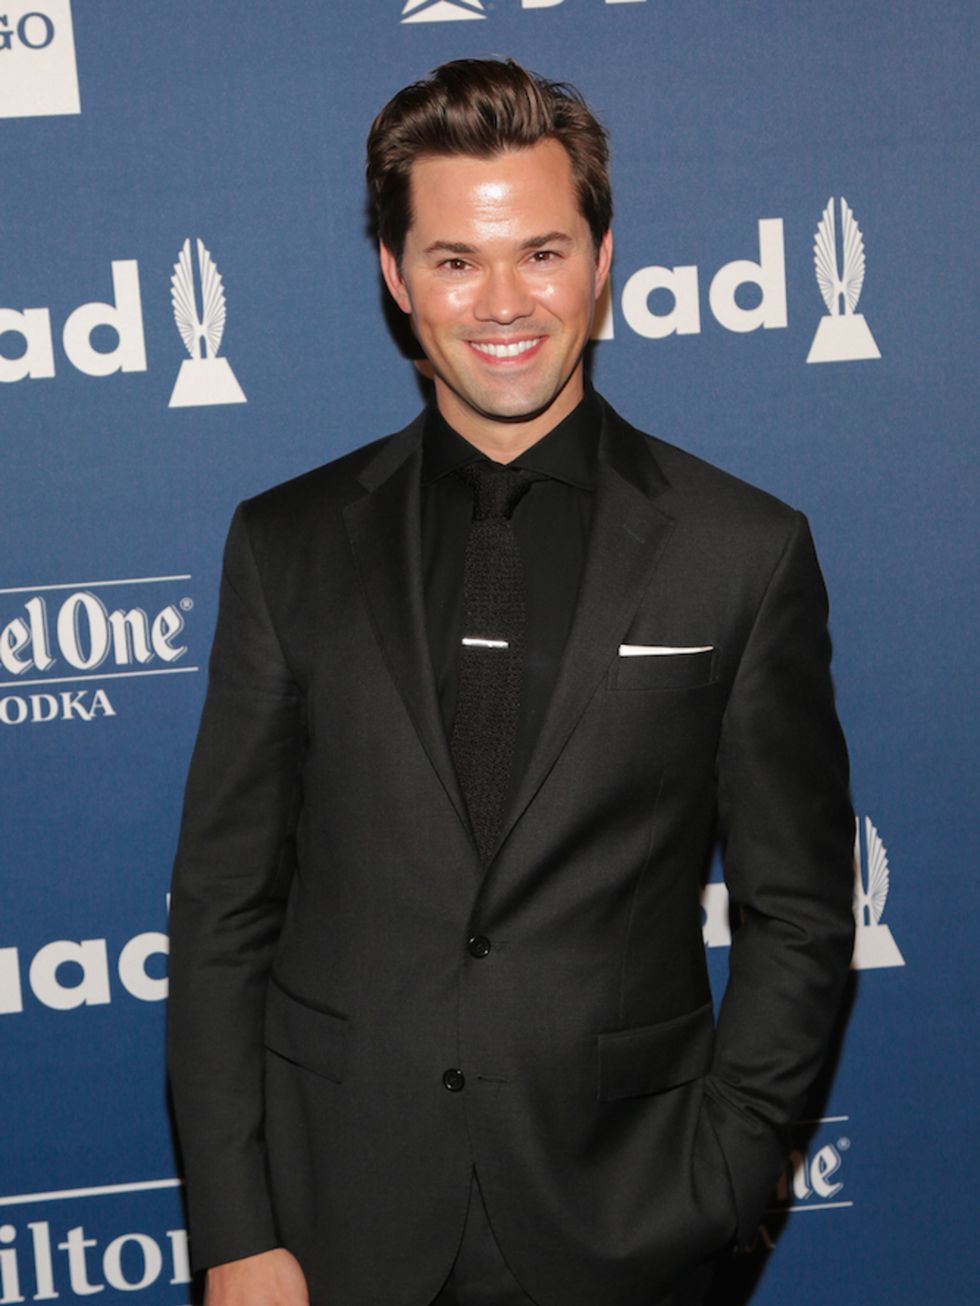 Girls star Andrew Rannells looking very dapper in all black.